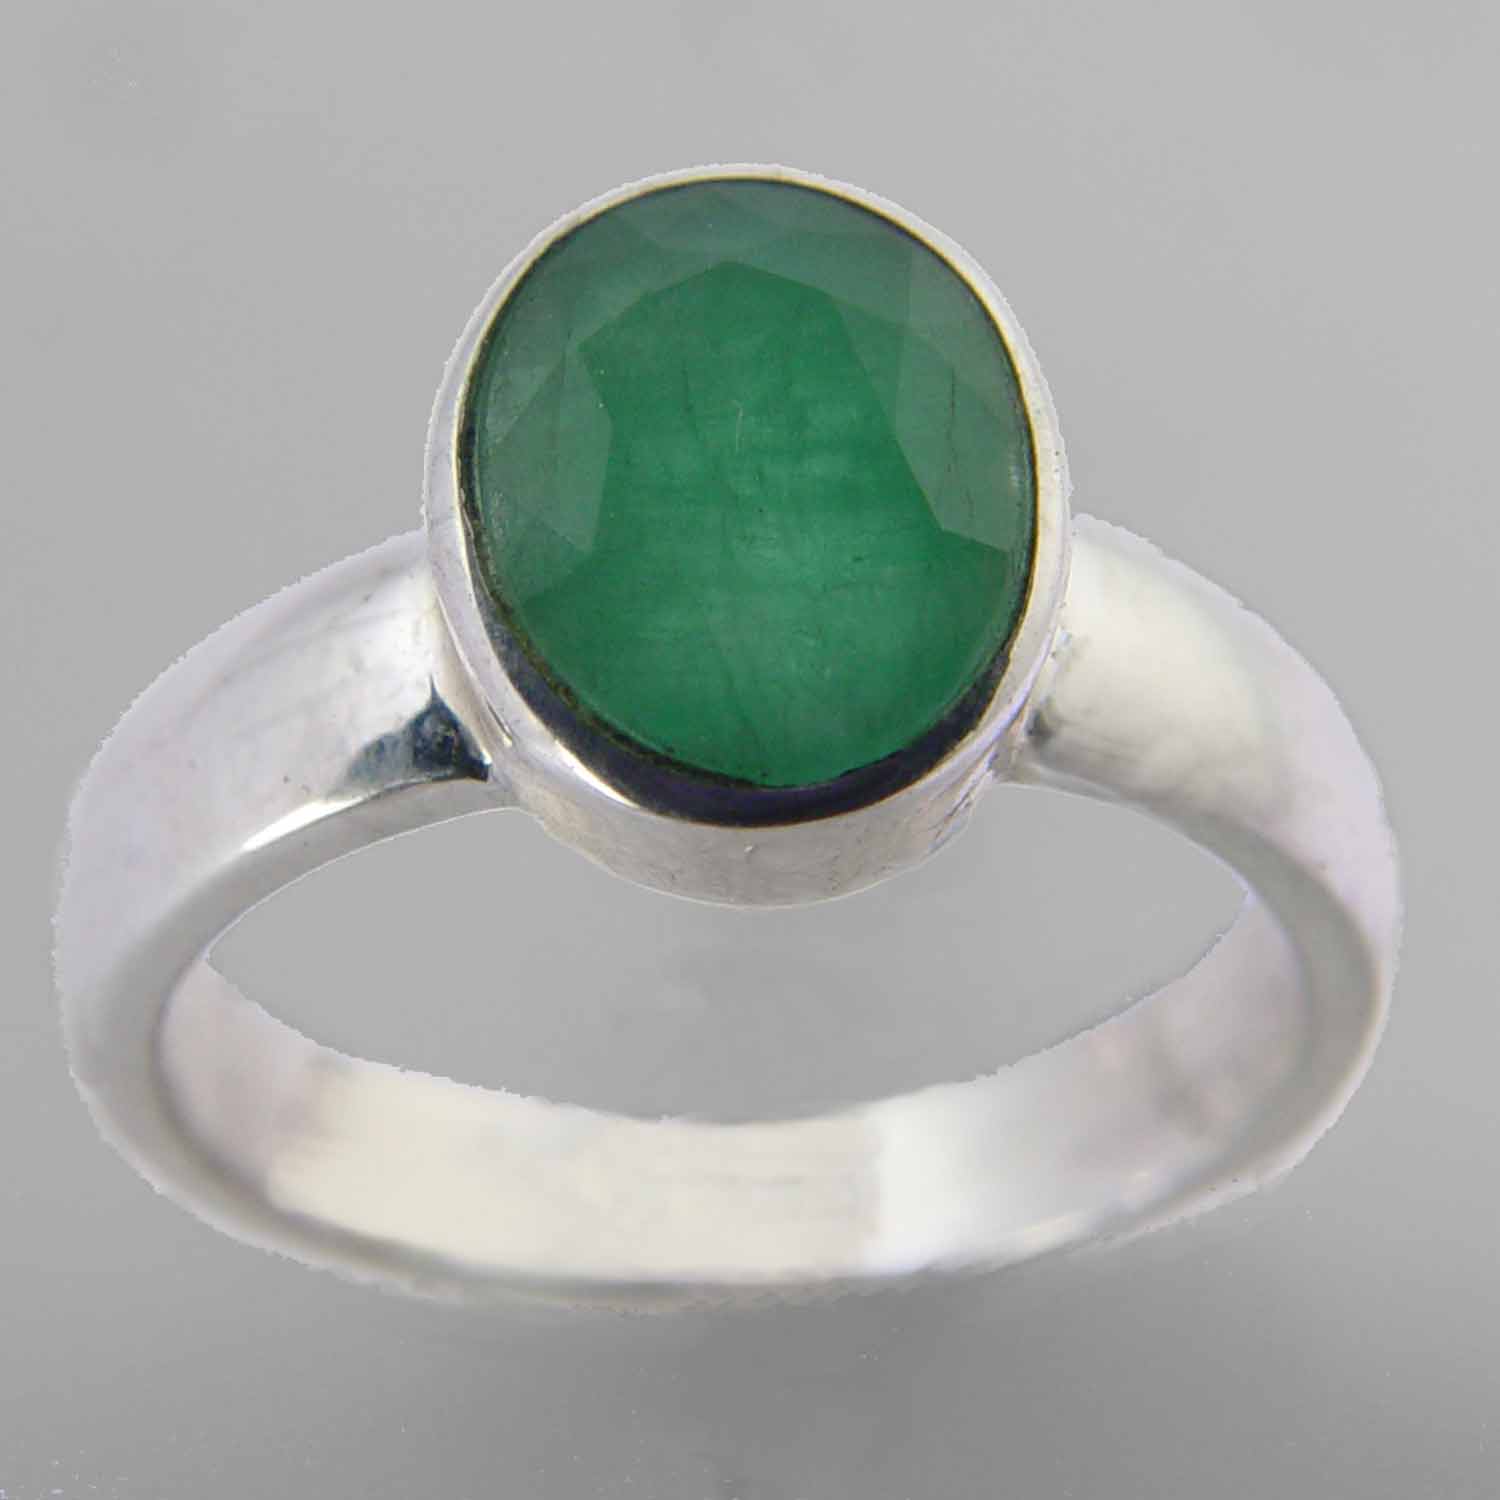 Presenting 9.50ct Emerald 925 Silver Ring